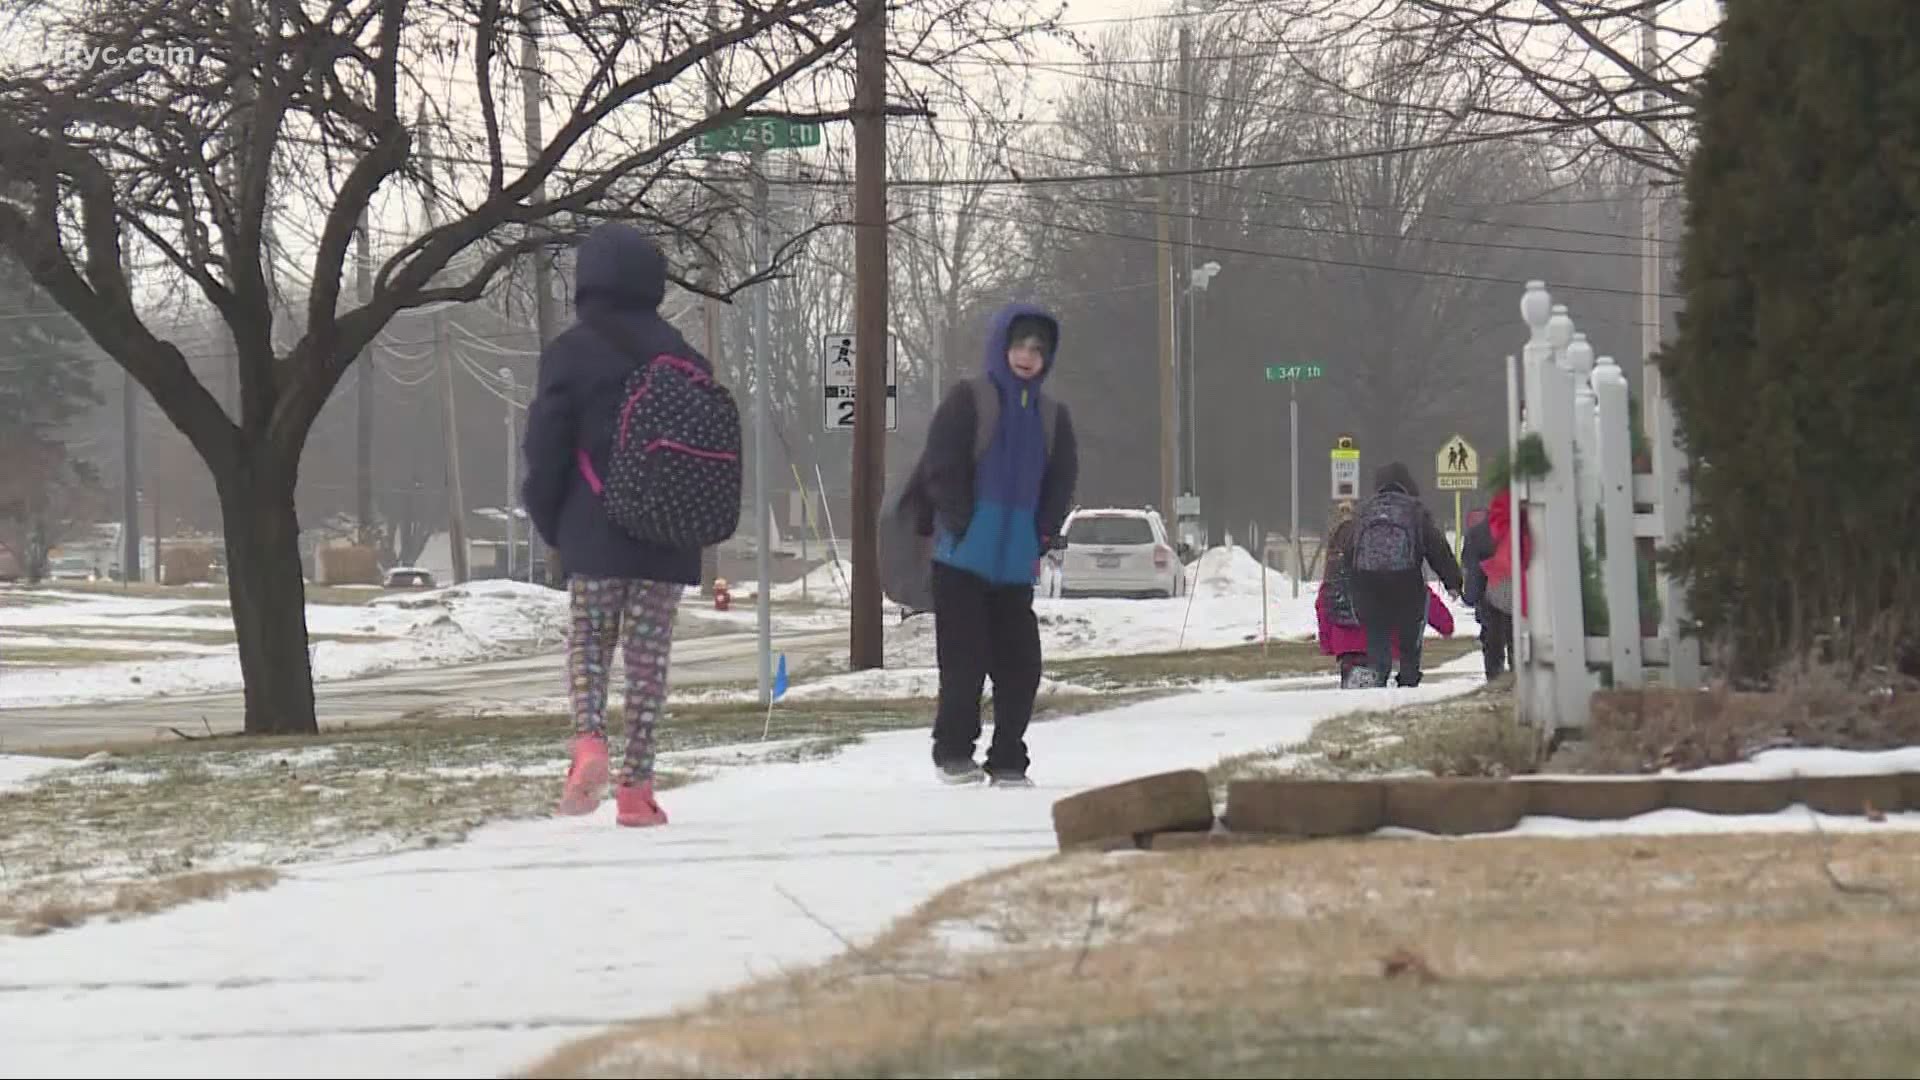 Local districts explain how they plan to approach snow days amid the pandemic. 3News Brandon Simmons reports.